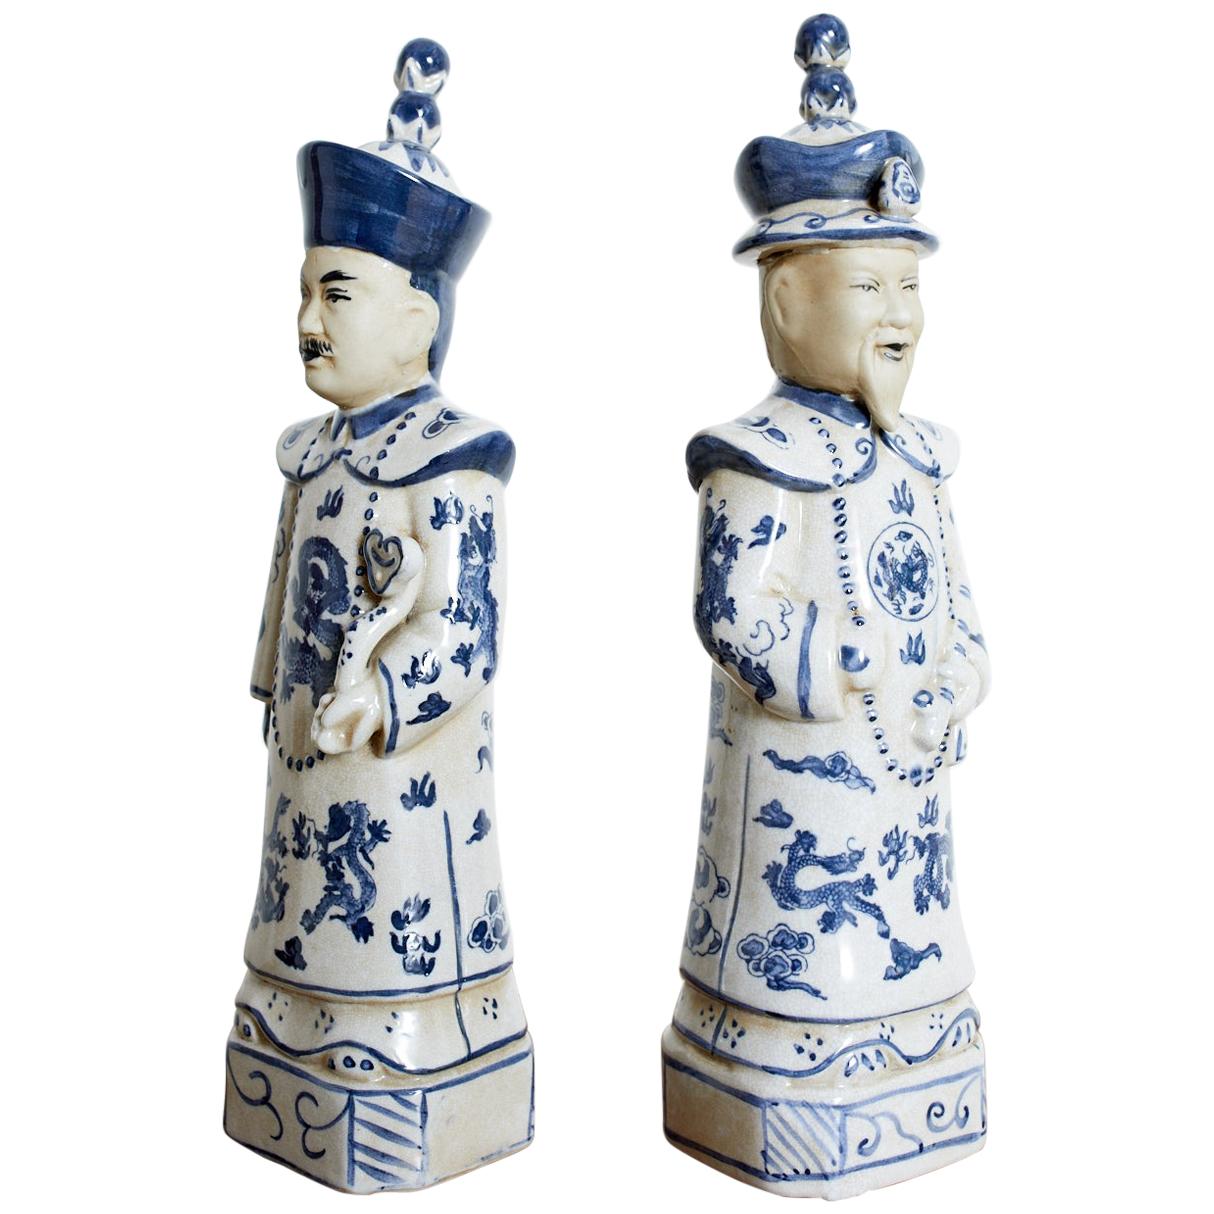 Pair of Chinese Blue and White Porcelain Official Figures